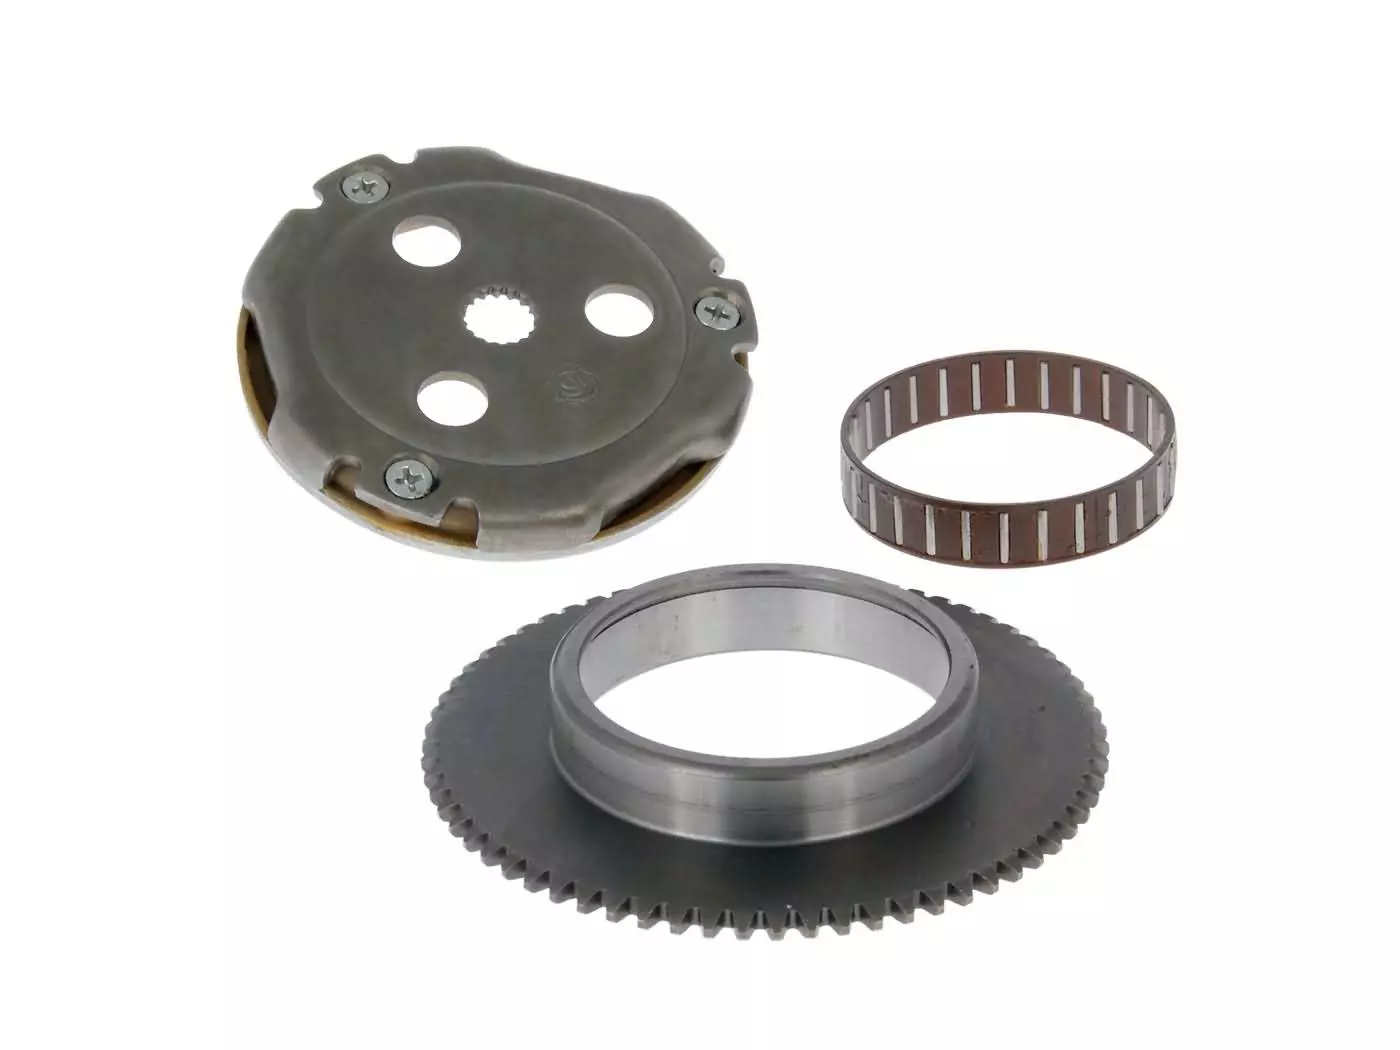 Starter Clutch Assy With Starter Gear Rim And Needle Bearing 13mm For China 2-stroke